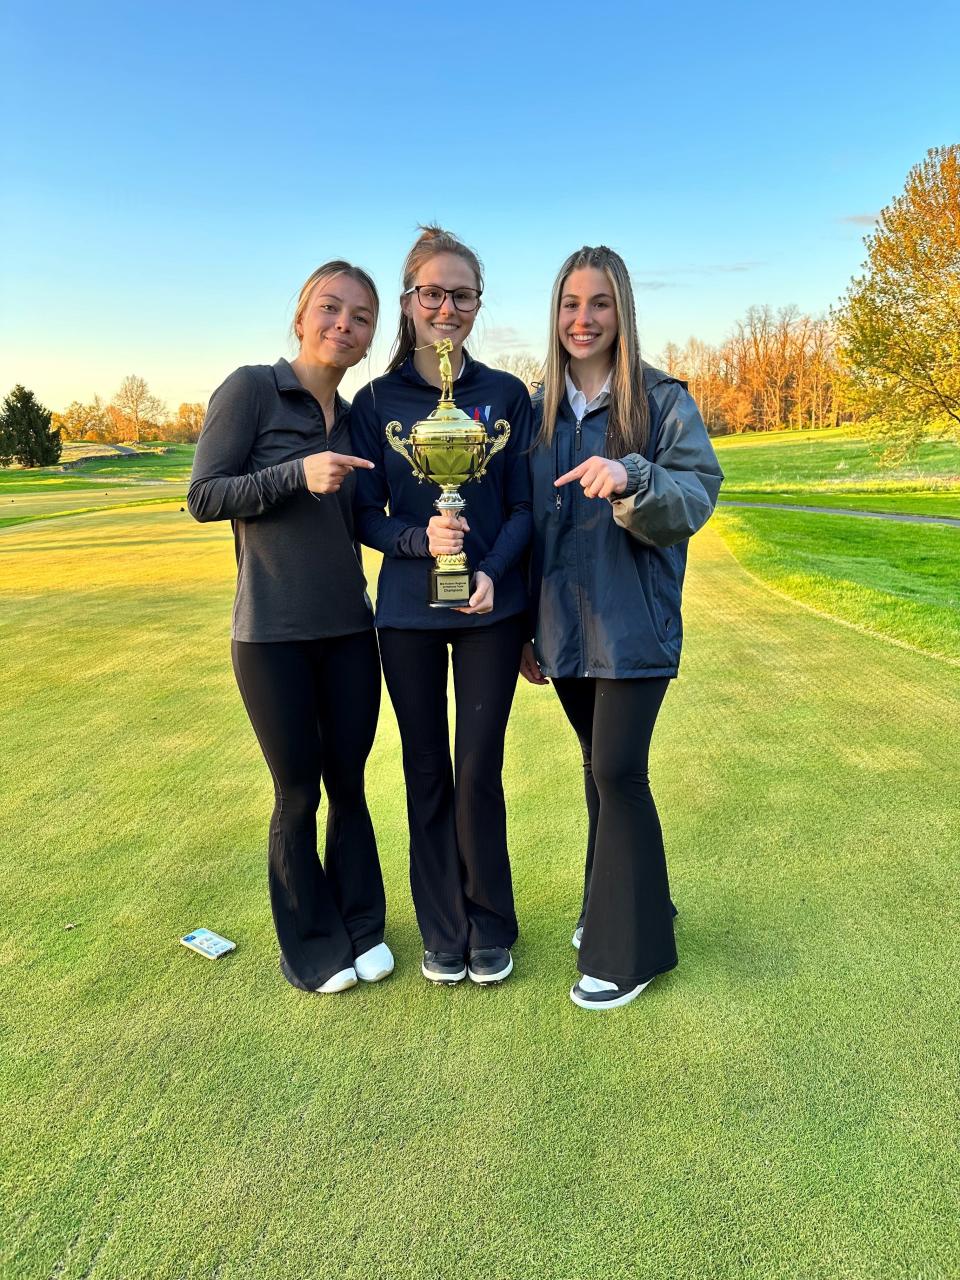 Wappingers girls golf teammates pose with the trophy after winning the Mid-Hudson Regional Tournament at Trump National Hudson Valley in Hopewell Junction on April 25, 2023. From left: Kayla Kinkel, Kate Robisch and Madison Townsend.